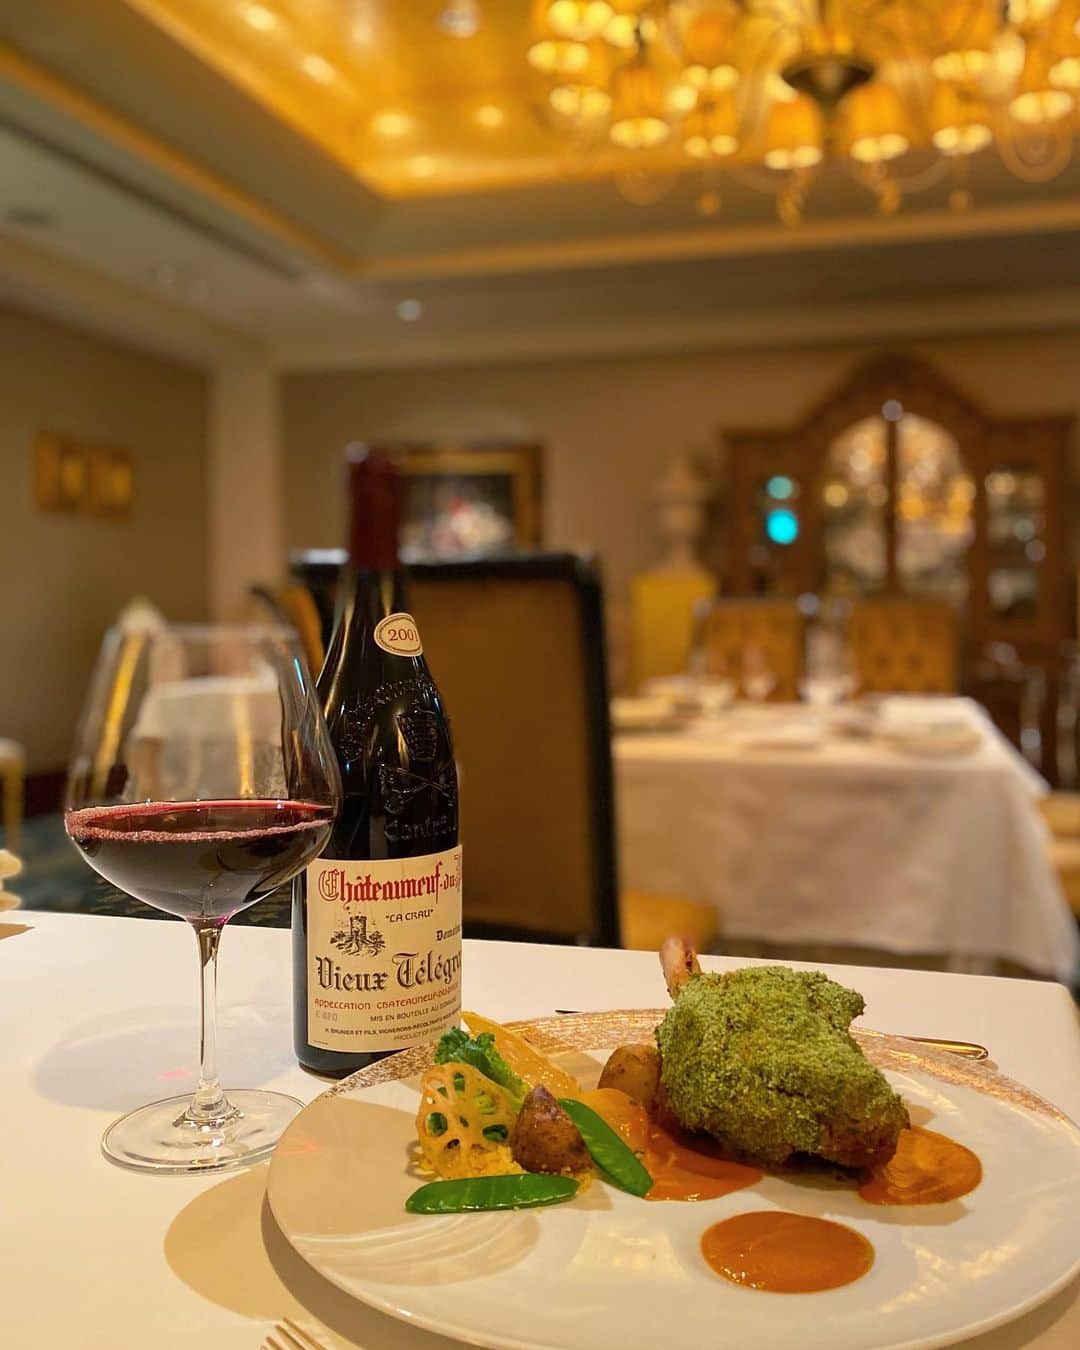 InterContinental Tokyo Bayさんのインスタグラム写真 - (InterContinental Tokyo BayInstagram)「. At Fine Dining La Provence, our chef has prepared rich flavored braise lamb shanks.  The shank is cooked slowly to melt in the mouth tenderness and its distinctive taste comes from the sauce with its vegetables.  Come and enjoy a culinary experience with our French delicacy.  ラ・プロヴァンスでは、フランスの伝統料理仔羊のスネ肉のブレゼをご用意しております。り  香味野菜と共に煮込んだ仔羊のスネ肉は、味も見た目もインパクト抜群な一品です。 トマトと香味野菜を合わせたナヴァランソースとともにお楽しみください。  #intercontinentalTOKYObay  #インターコンチネンタル東京ベイ  #LaProvence #ラプロヴァンス #フレンチ #French #レストラン #Restaurant #ランチ #Lunch  #ディナー #dinner #tokyofoodie #tokyohotel #tokyorestaurant  #フレンチ好きな人と繋がりたい  #frenchlover #frenchfood  #foodie #finedining #finedininglovers #tokyofrench  #記念日ディナー #記念日レストラン」4月12日 1時41分 - intercontitokyobay